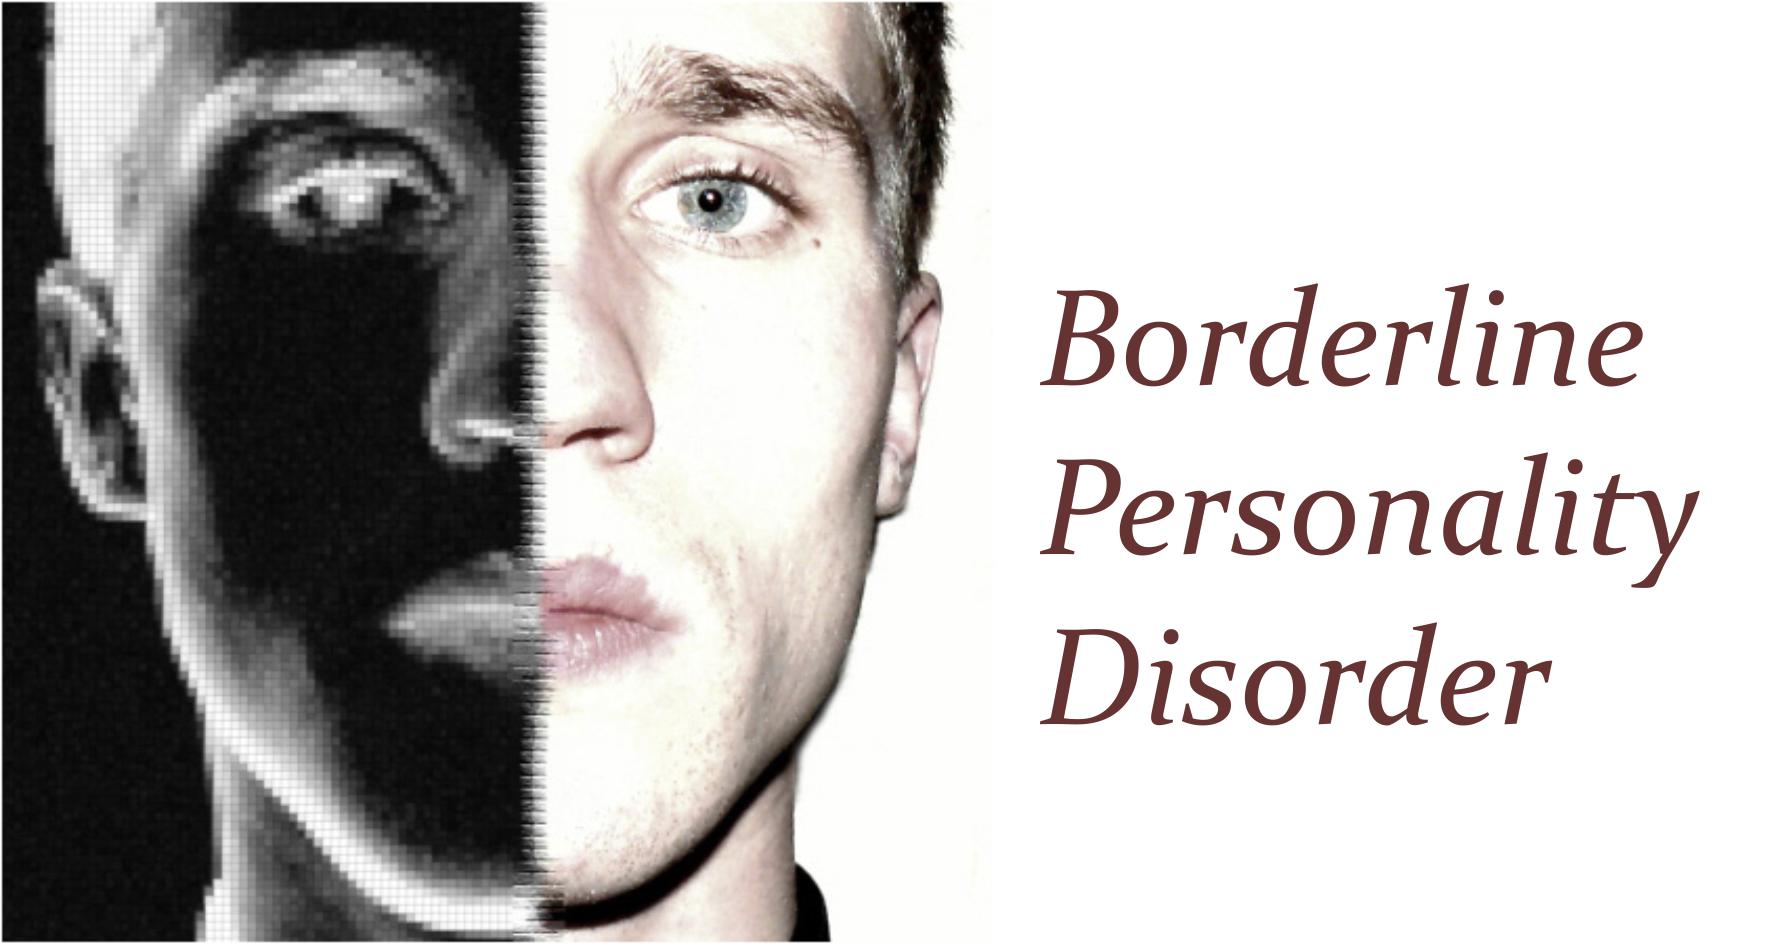 Bordeline Personality Disorder: Warning Signs | Astron Lifesciences